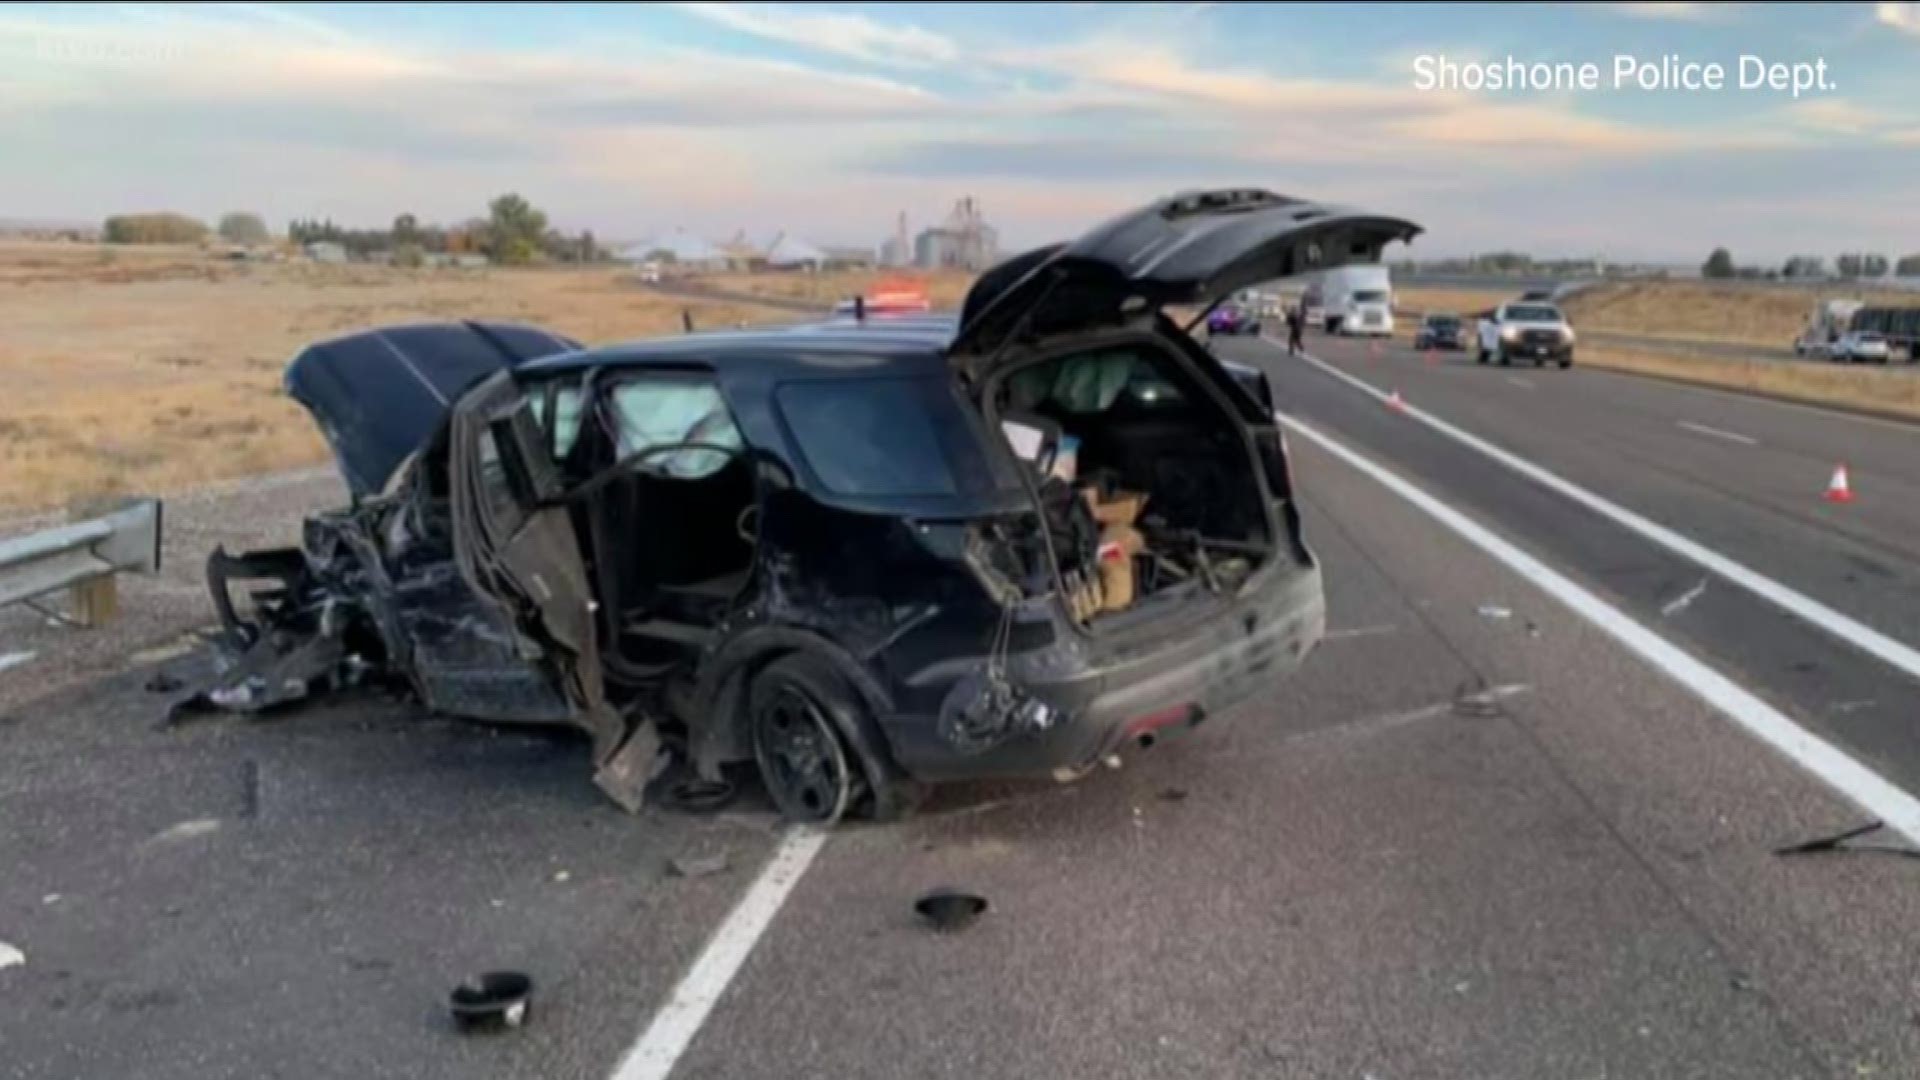 Officers from the Shoshone Police Department were training in Hagerman this week when they unexpectedly became part of two high-speed chases and crashes.